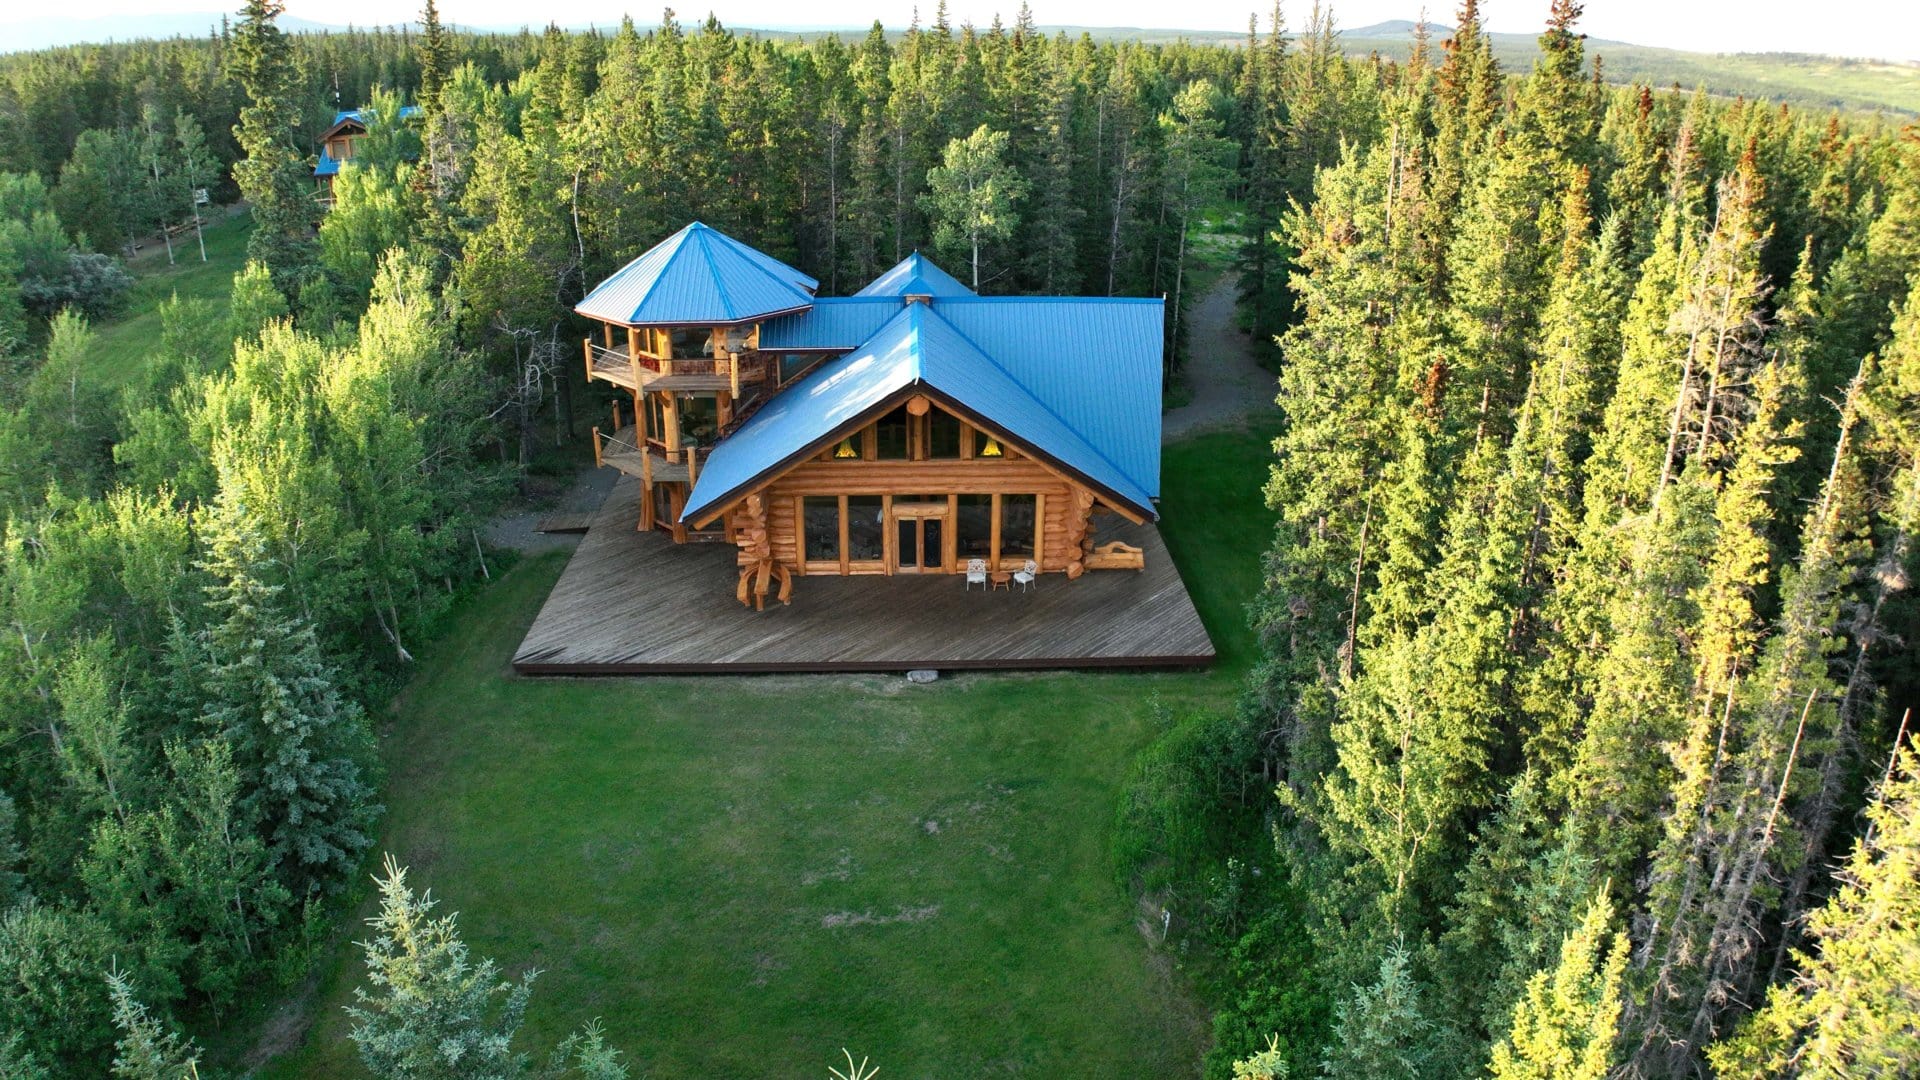 tower house aerial bc canada eye of the grizzly luxury retreat